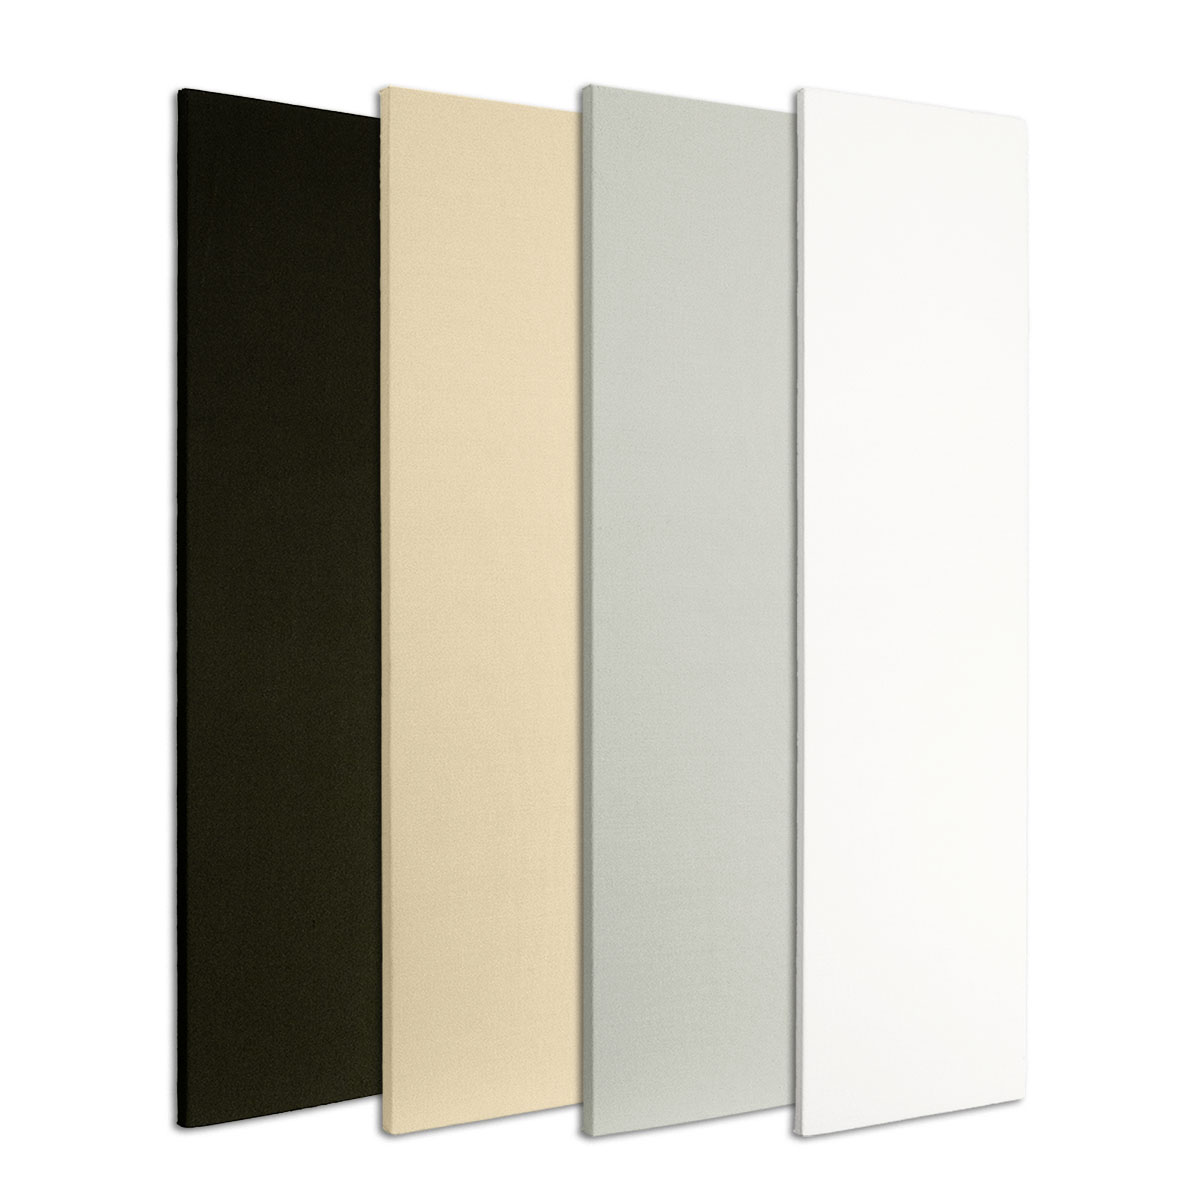 Acoustical Solutions Basics Panels come in four of our most popular colors